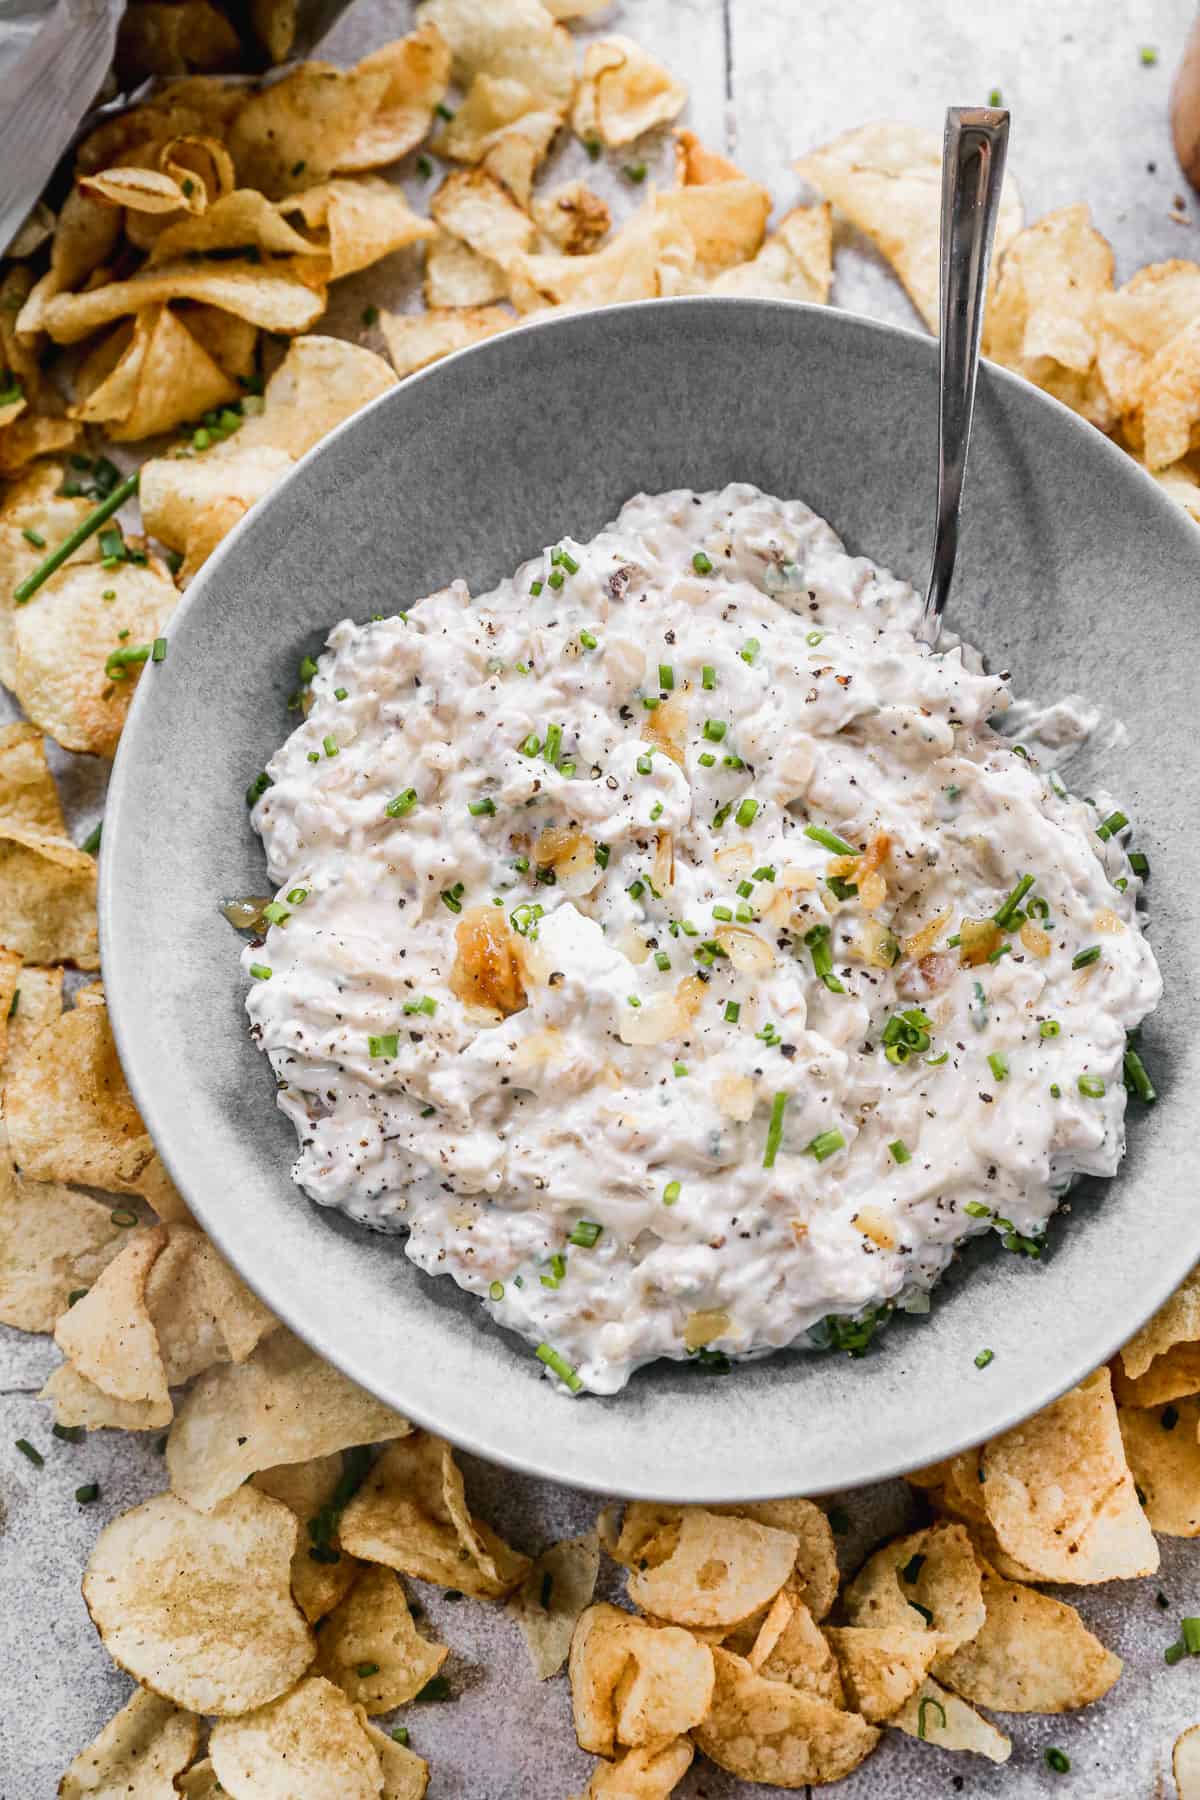 A homemade French Onion Dip with caramelized onions in a bowl and ready to enjoy with potato chips.